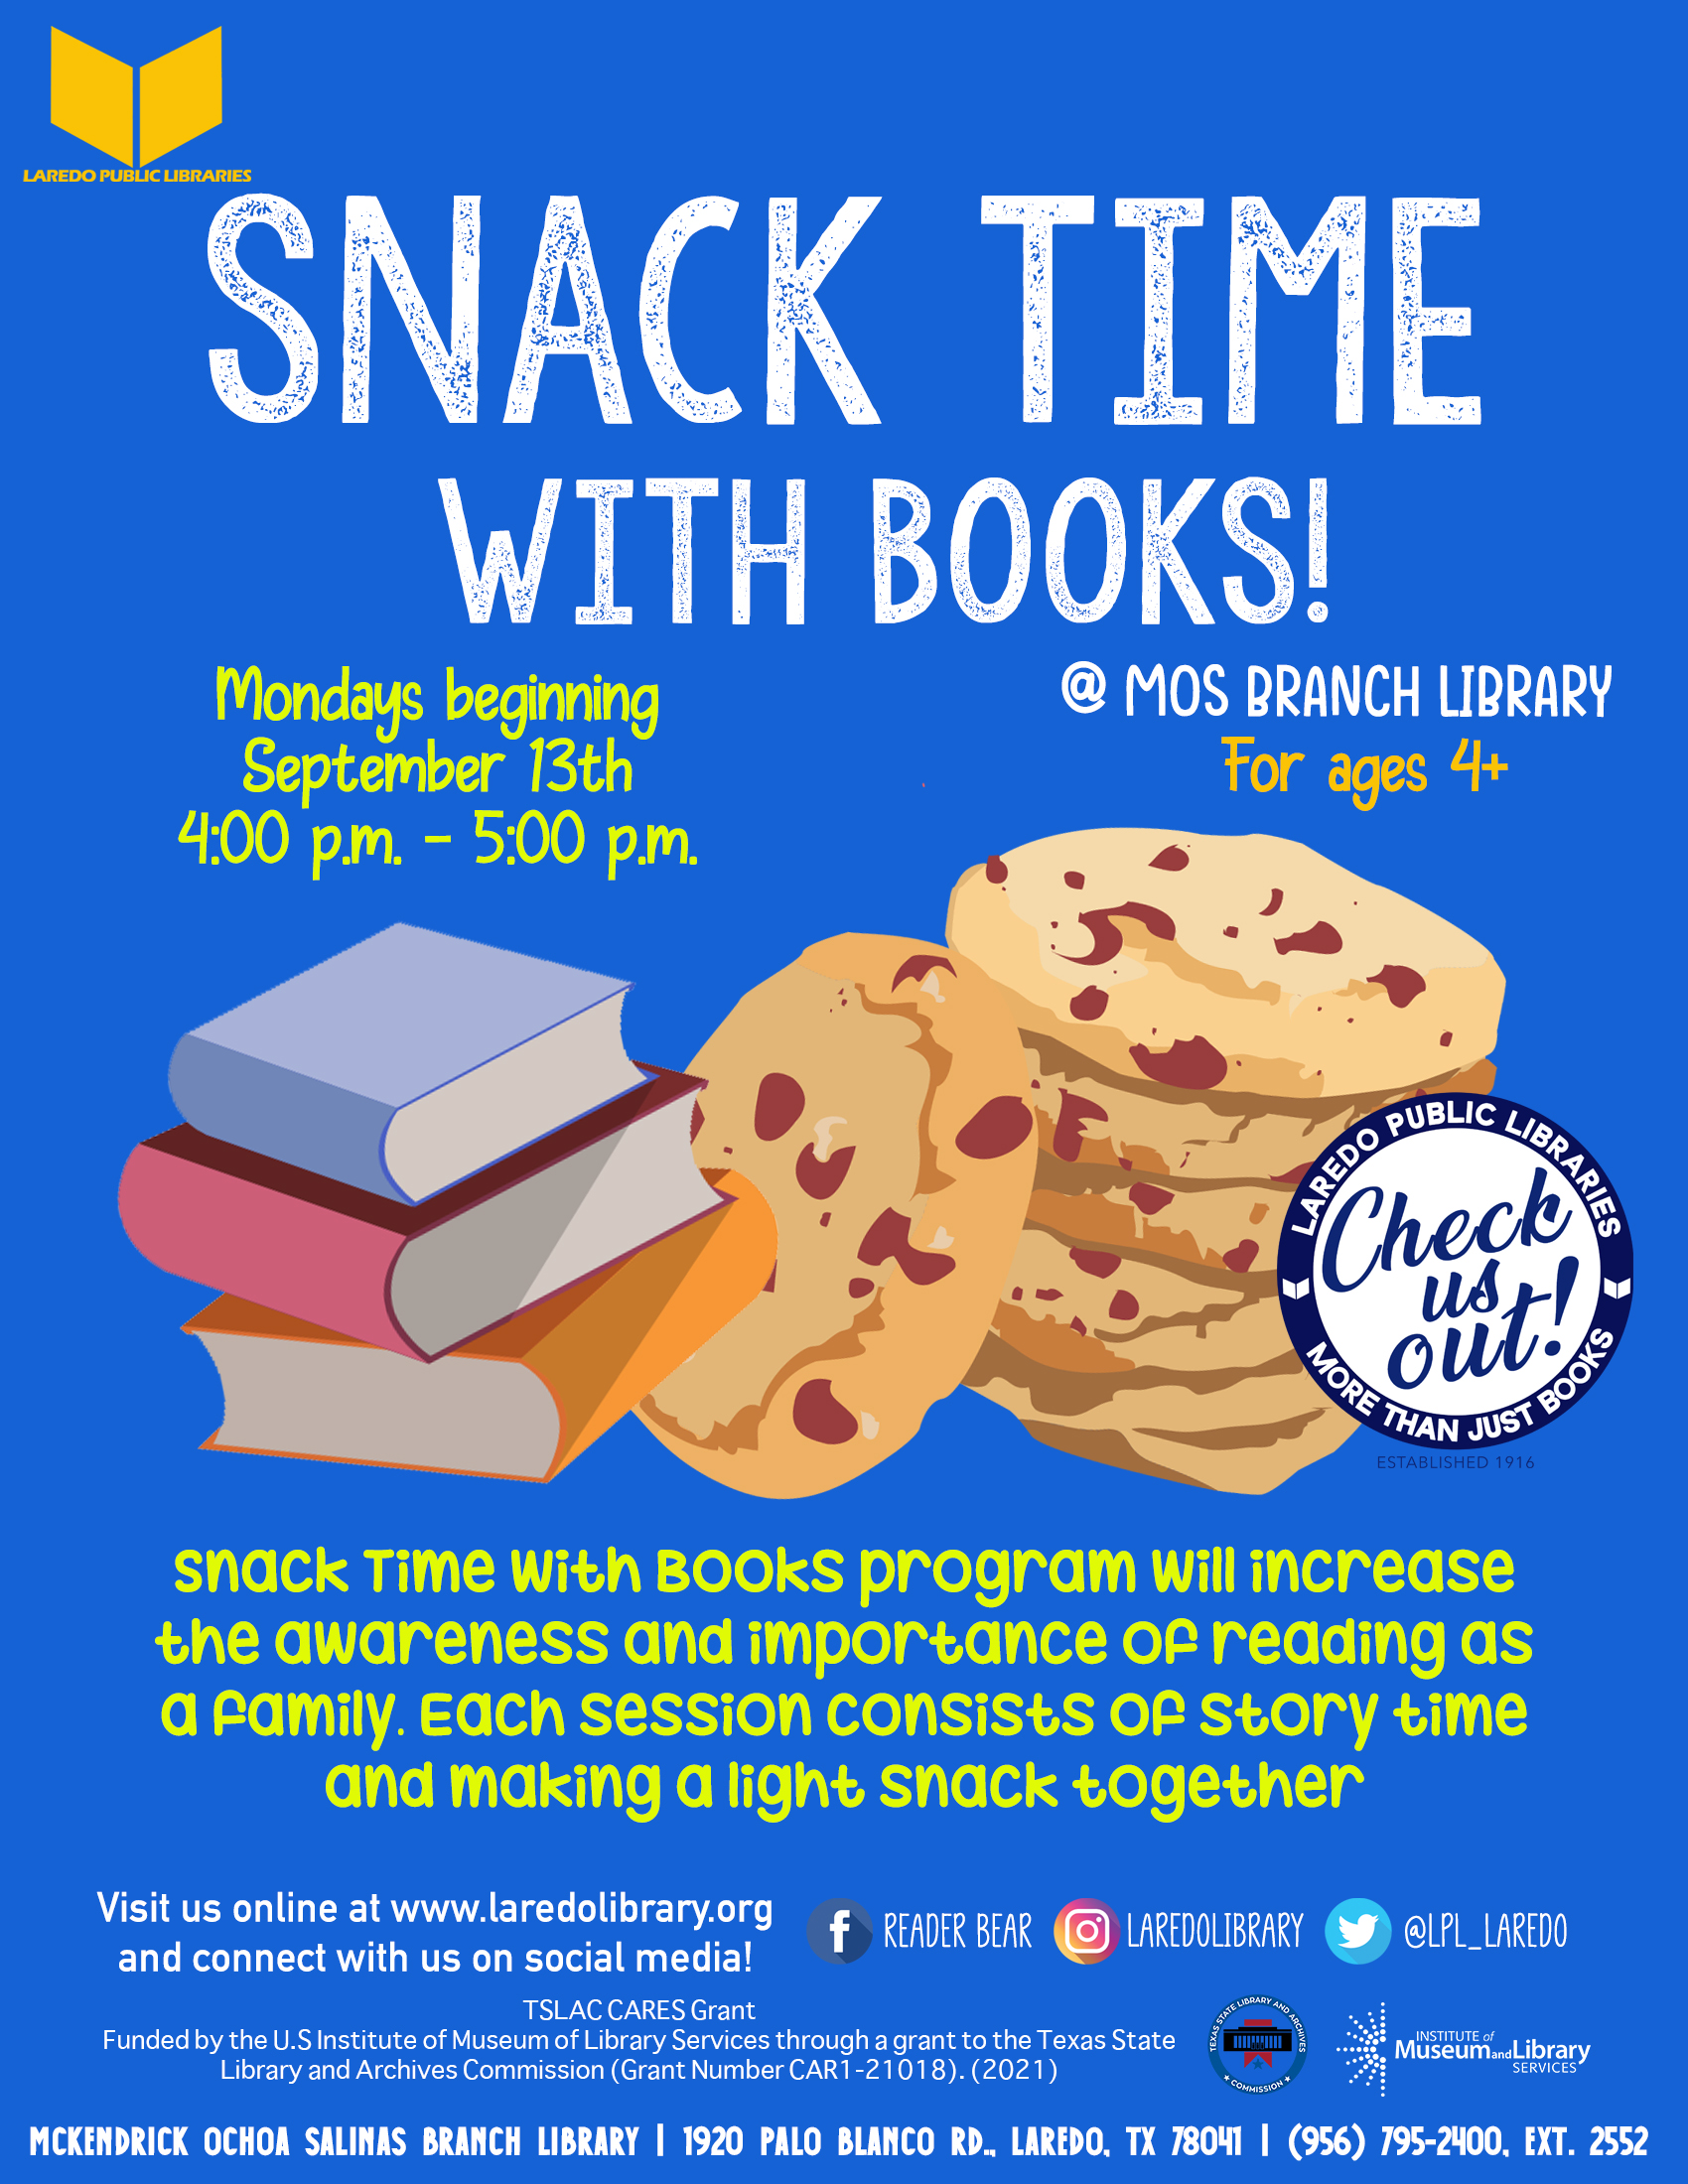 Snack Time with Books!